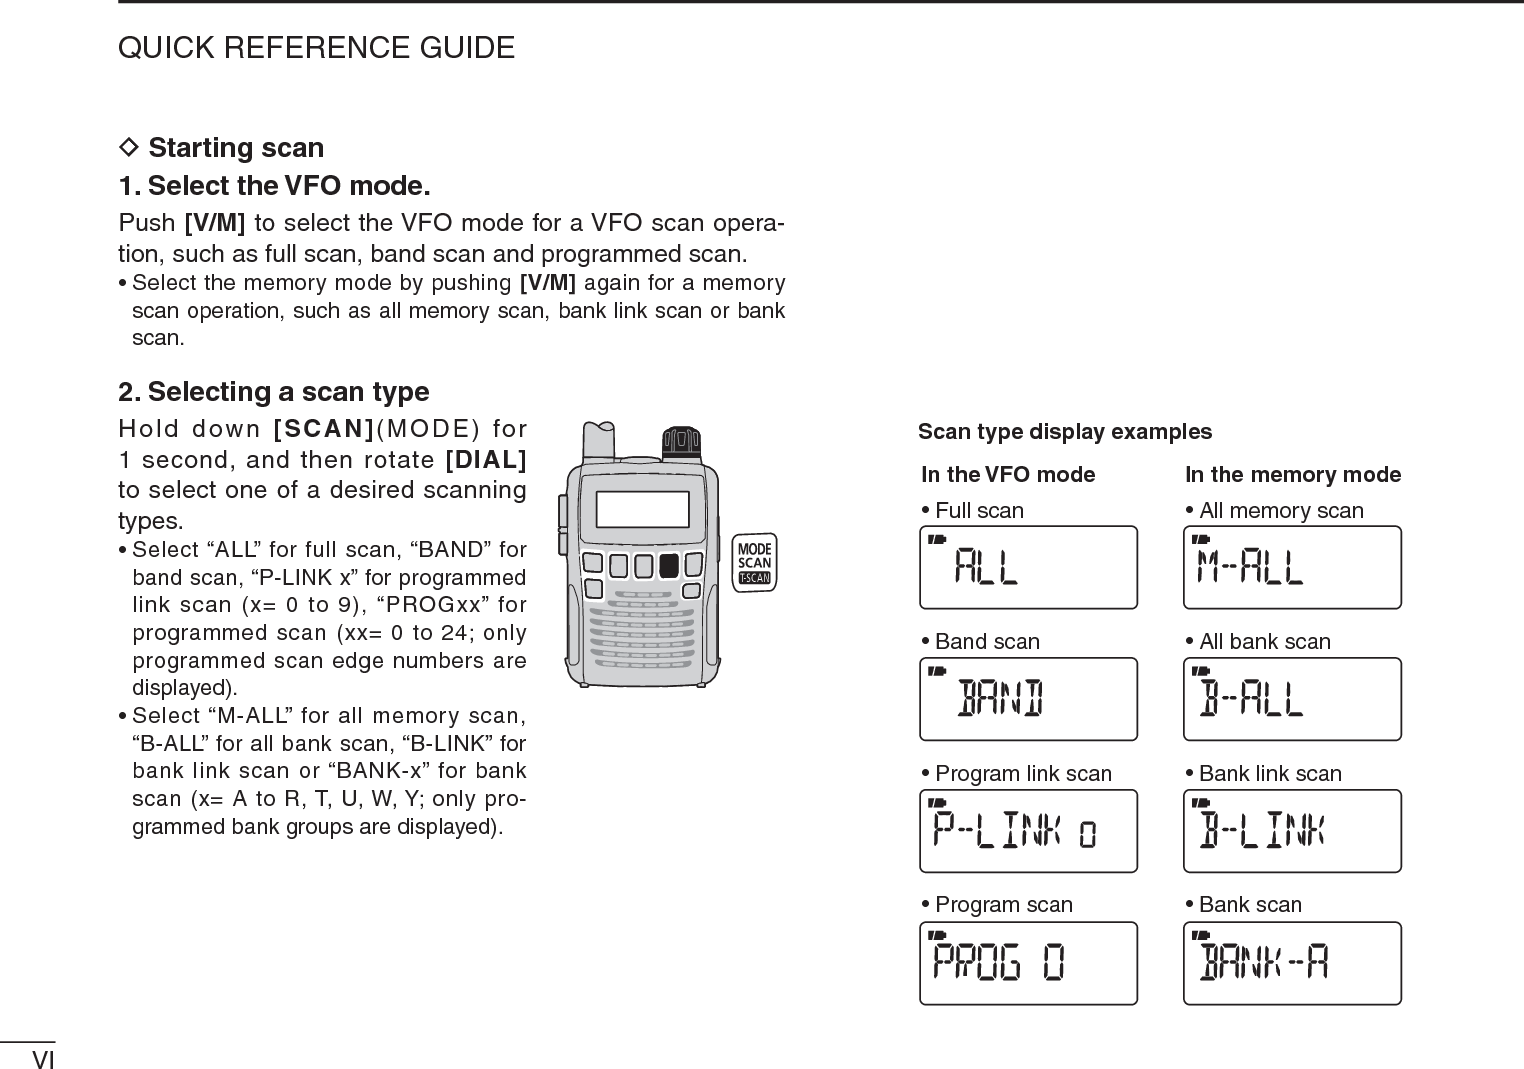 VIQUICK REFERENCE GUIDED Starting scan1. Select the VFO mode.Push [V/M] to select the VFO mode for a VFO scan opera-tion, such as full scan, band scan and programmed scan.• Select the memory mode by pushing [V/M] again for a memory scan operation, such as all memory scan, bank link scan or bank scan.2. Selecting a scan typeHold down[SCAN](MODE) for 1 second, and then rotate [DIAL]to select one of a desired scanning types.• Select “ALL” for full scan, “BAND” for band scan, “P-LINK x” for programmed link scan (x= 0 to 9), “PROGxx” for programmed scan (xx= 0 to 24; only programmed scan edge numbers are displayed).• Select “M-ALL” for all memory scan, “B-ALL” for all bank scan, “B-LINK” for bank link scan or “BANK-x” for bank scan (x= A to R, T, U, W, Y; only pro-grammed bank groups are displayed).• Full scan• Band scan• Program link scan• Program scan• All memory scan• All bank scan• Bank link scan• Bank scanScan type display examplesIn the VFO mode In the memory mode